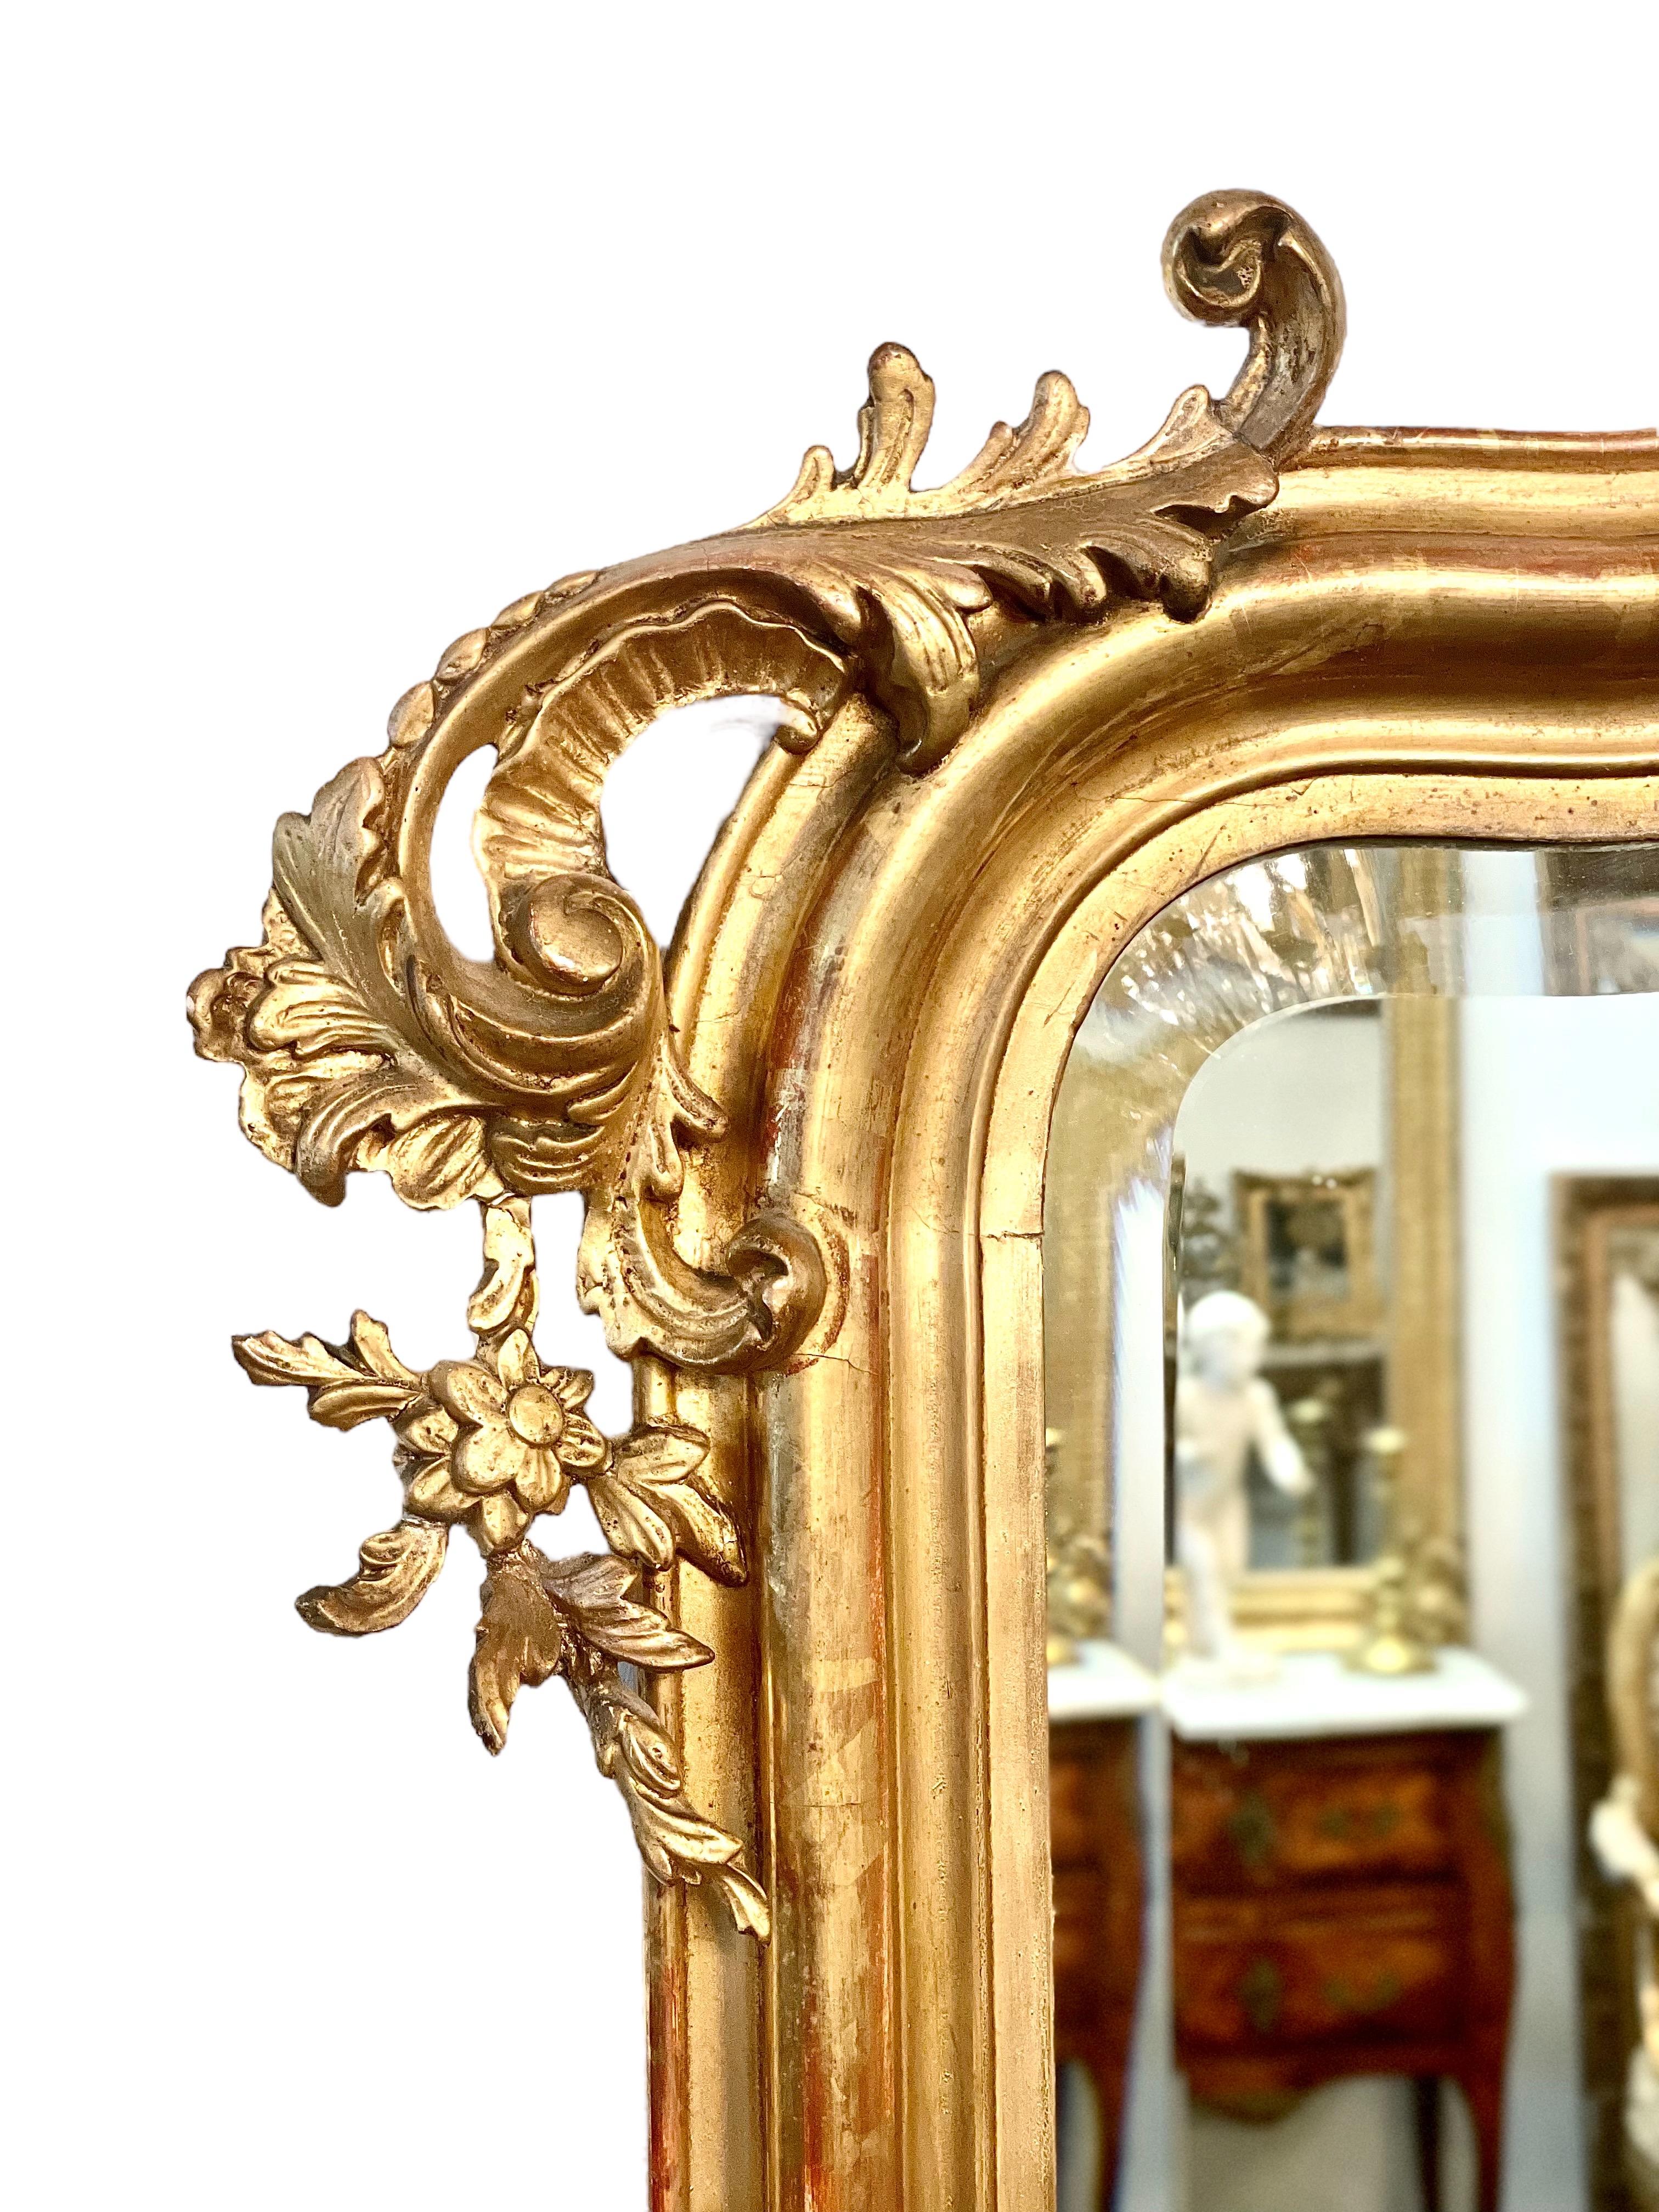 An absolutely stunning gilt and carved wood Louis XV style mirror, dating from the second half of the 19th century, and featuring an oversized coquille crest, flanked by swathes of fanciful foliage and flowers. Additional decoration at the shoulders